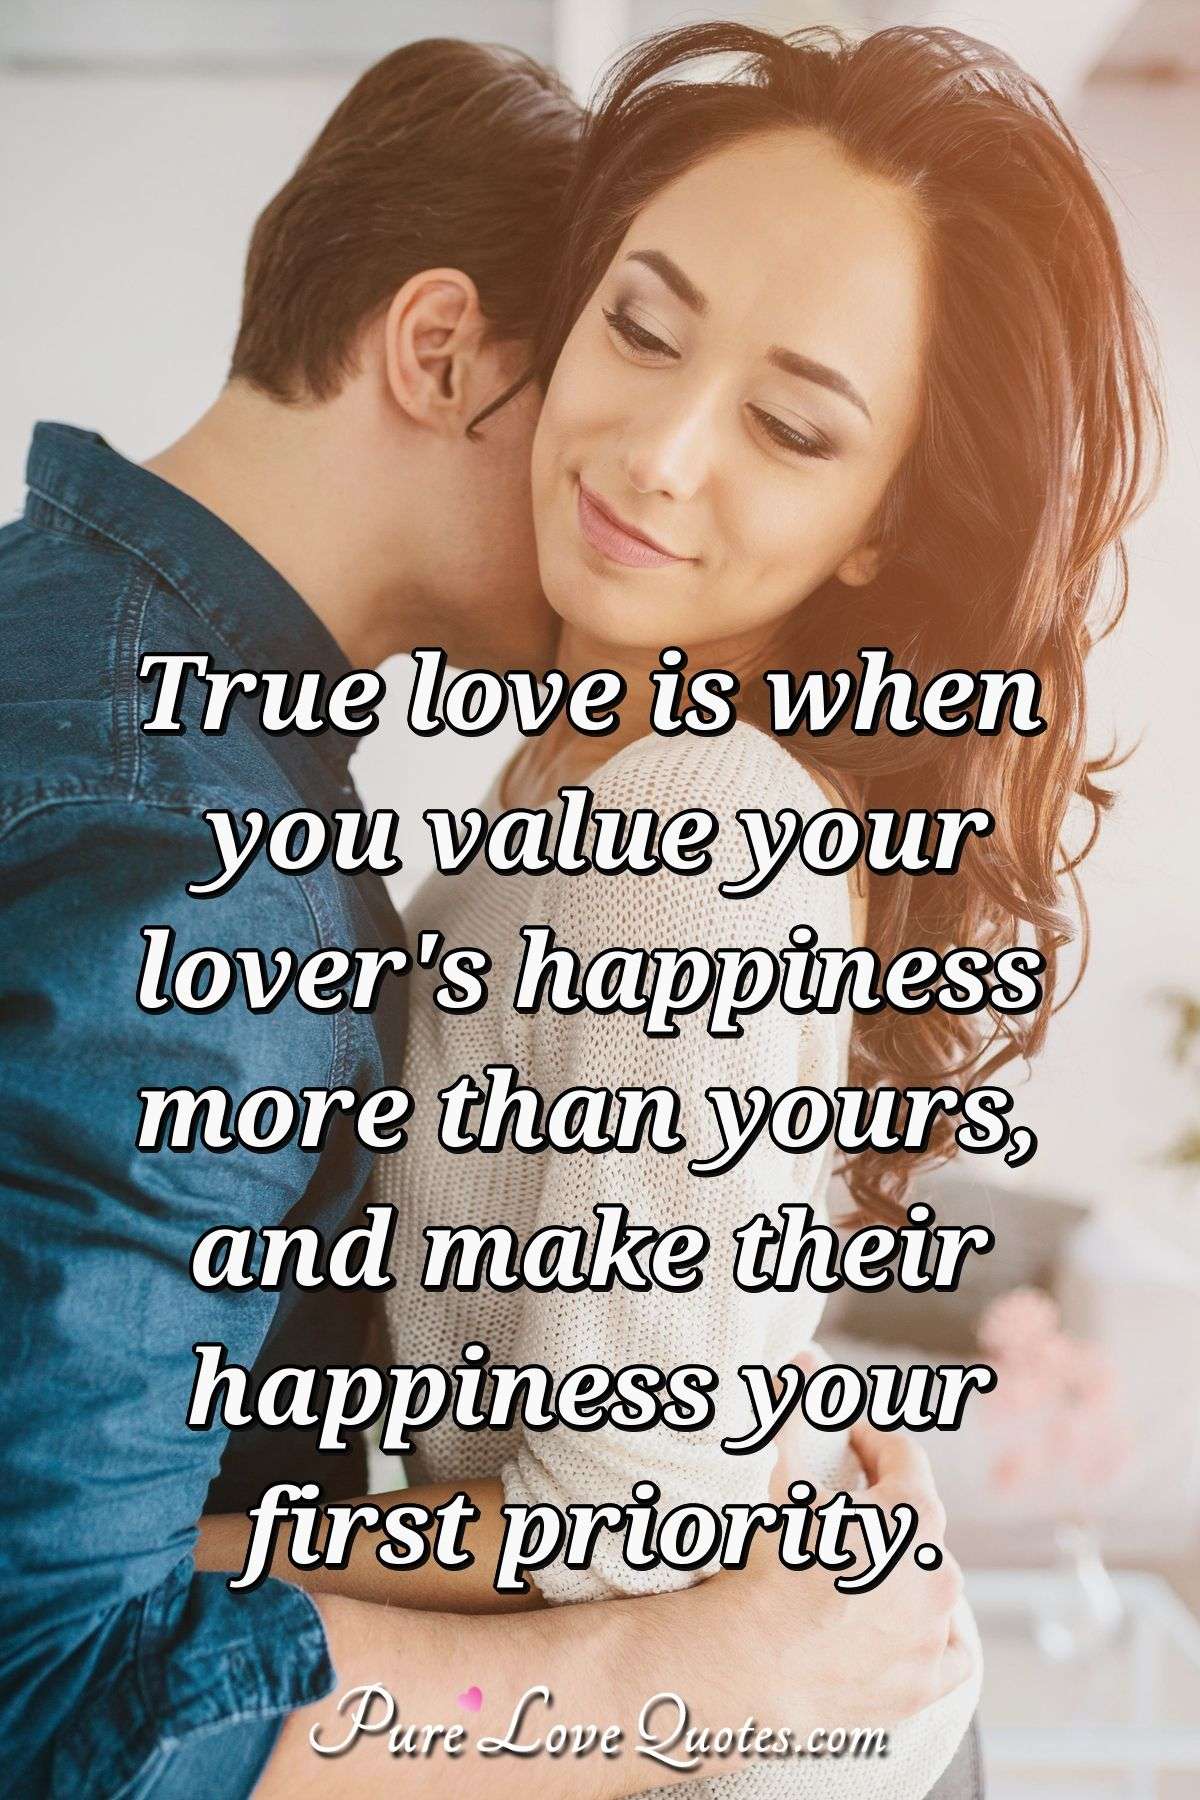 Quotes About Happiness And Love For Her